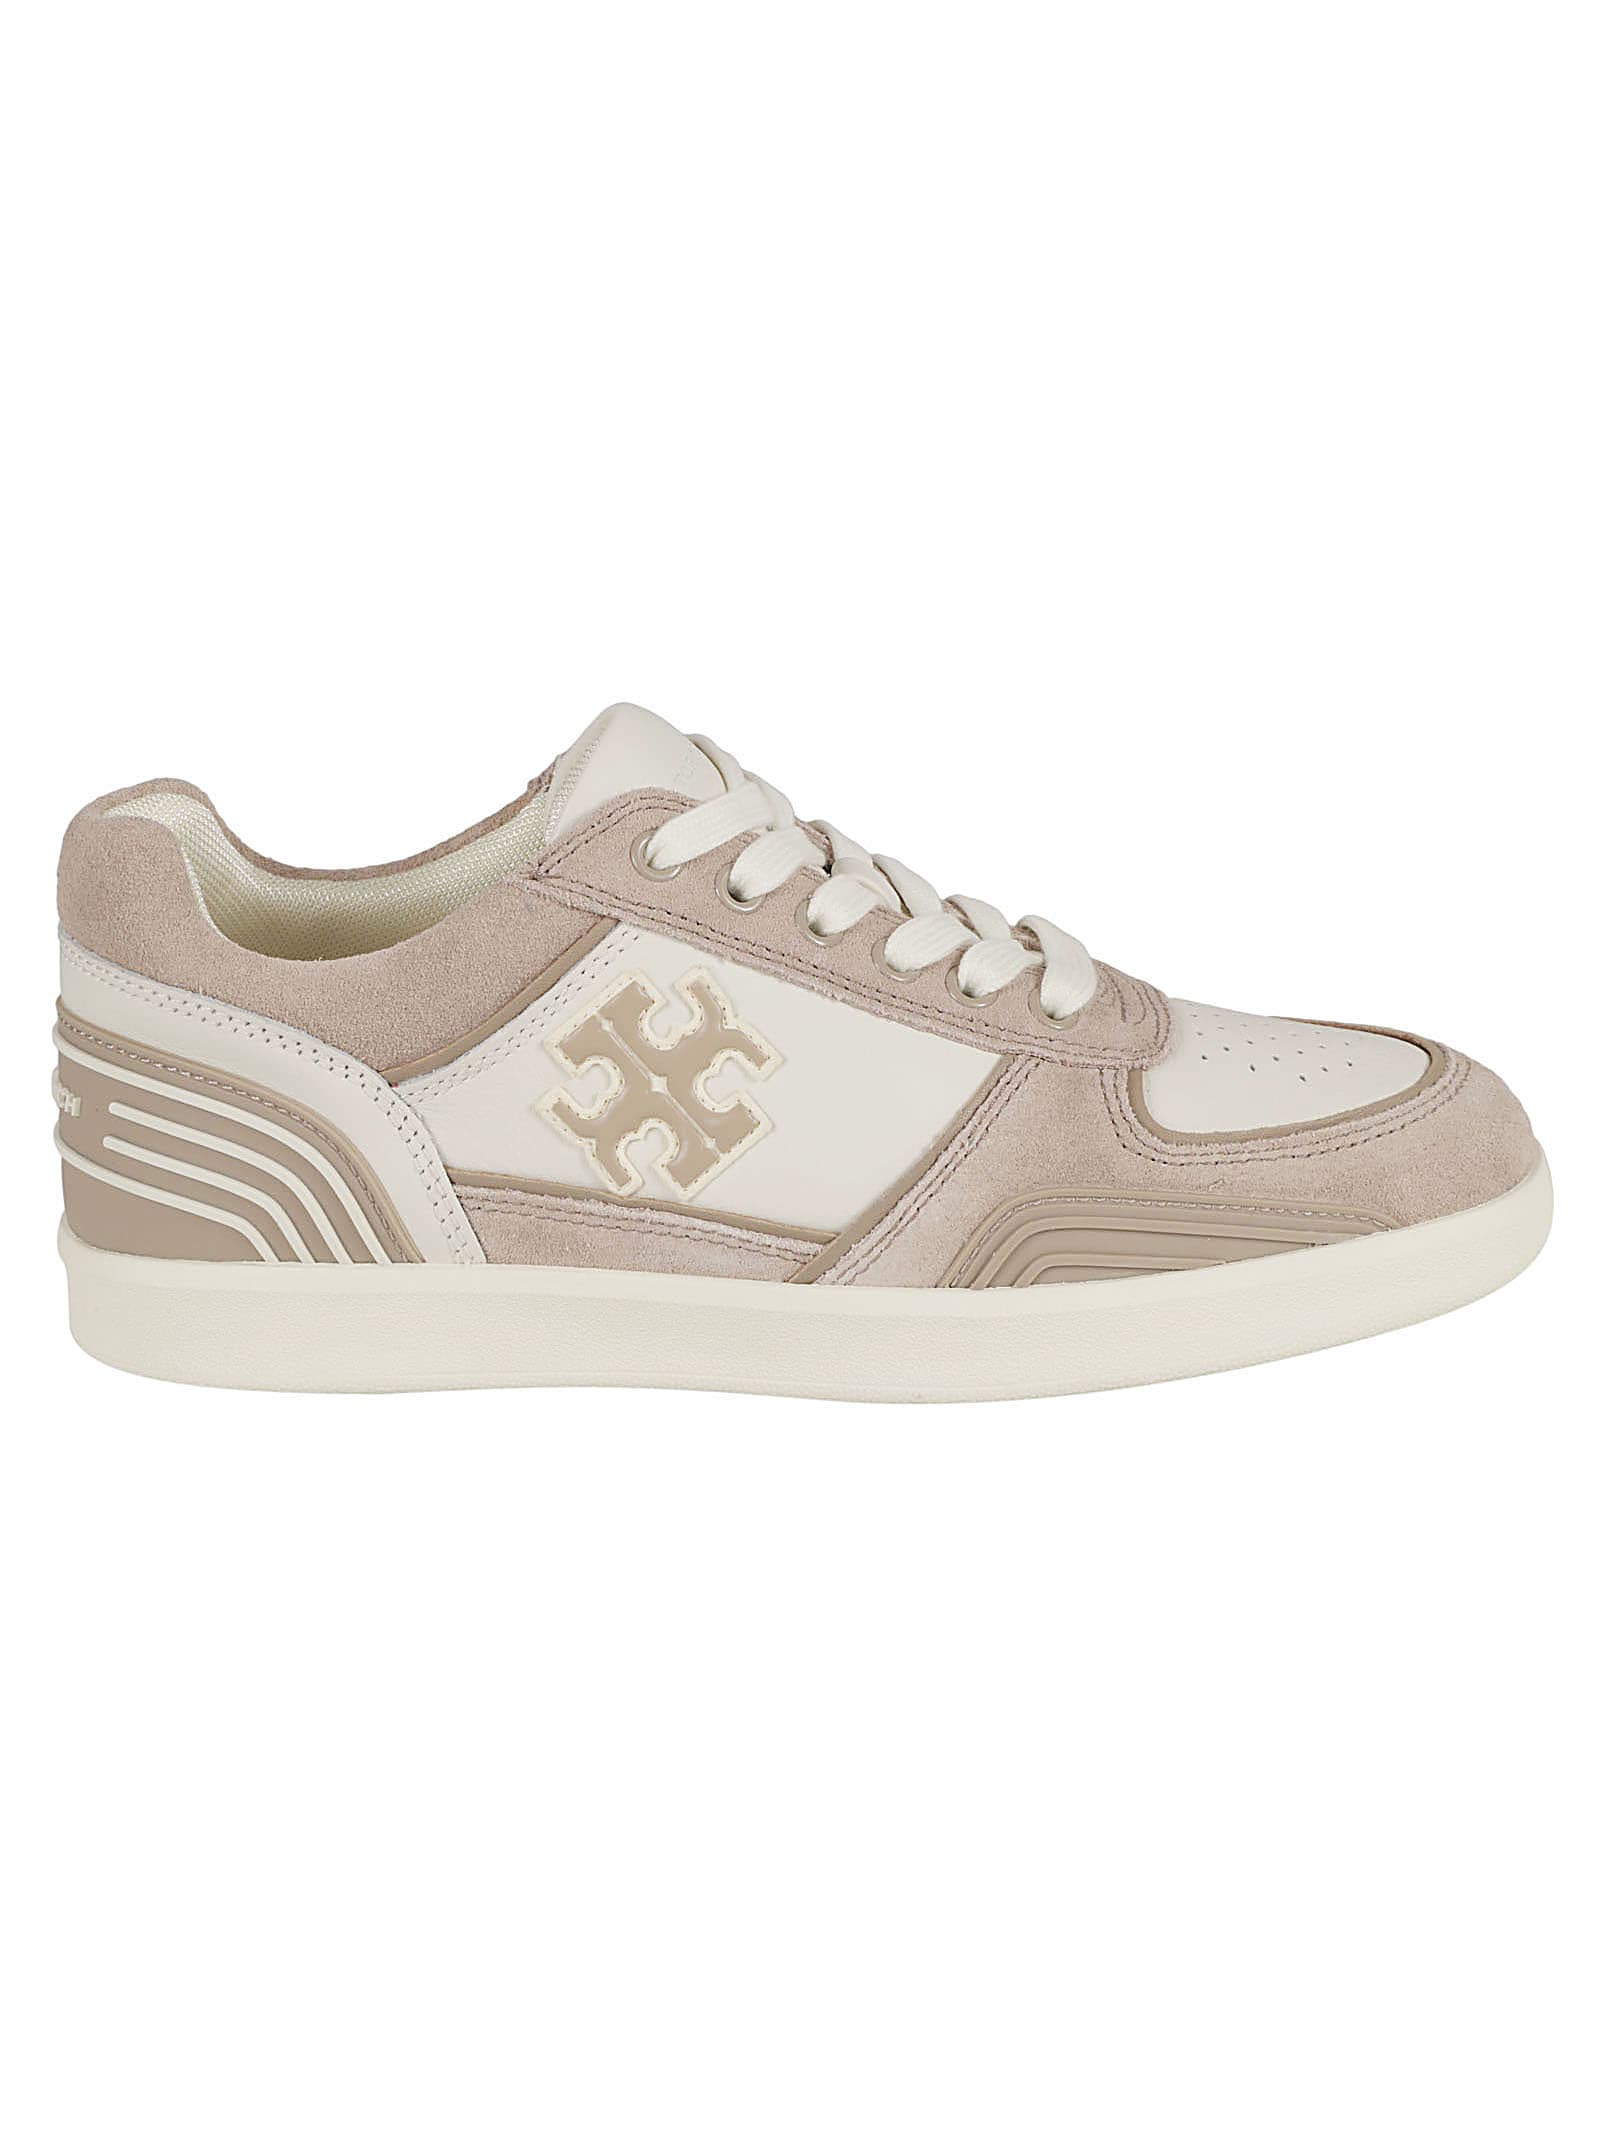 Shop Tory Burch Clover Court Sneakers In New Ivory